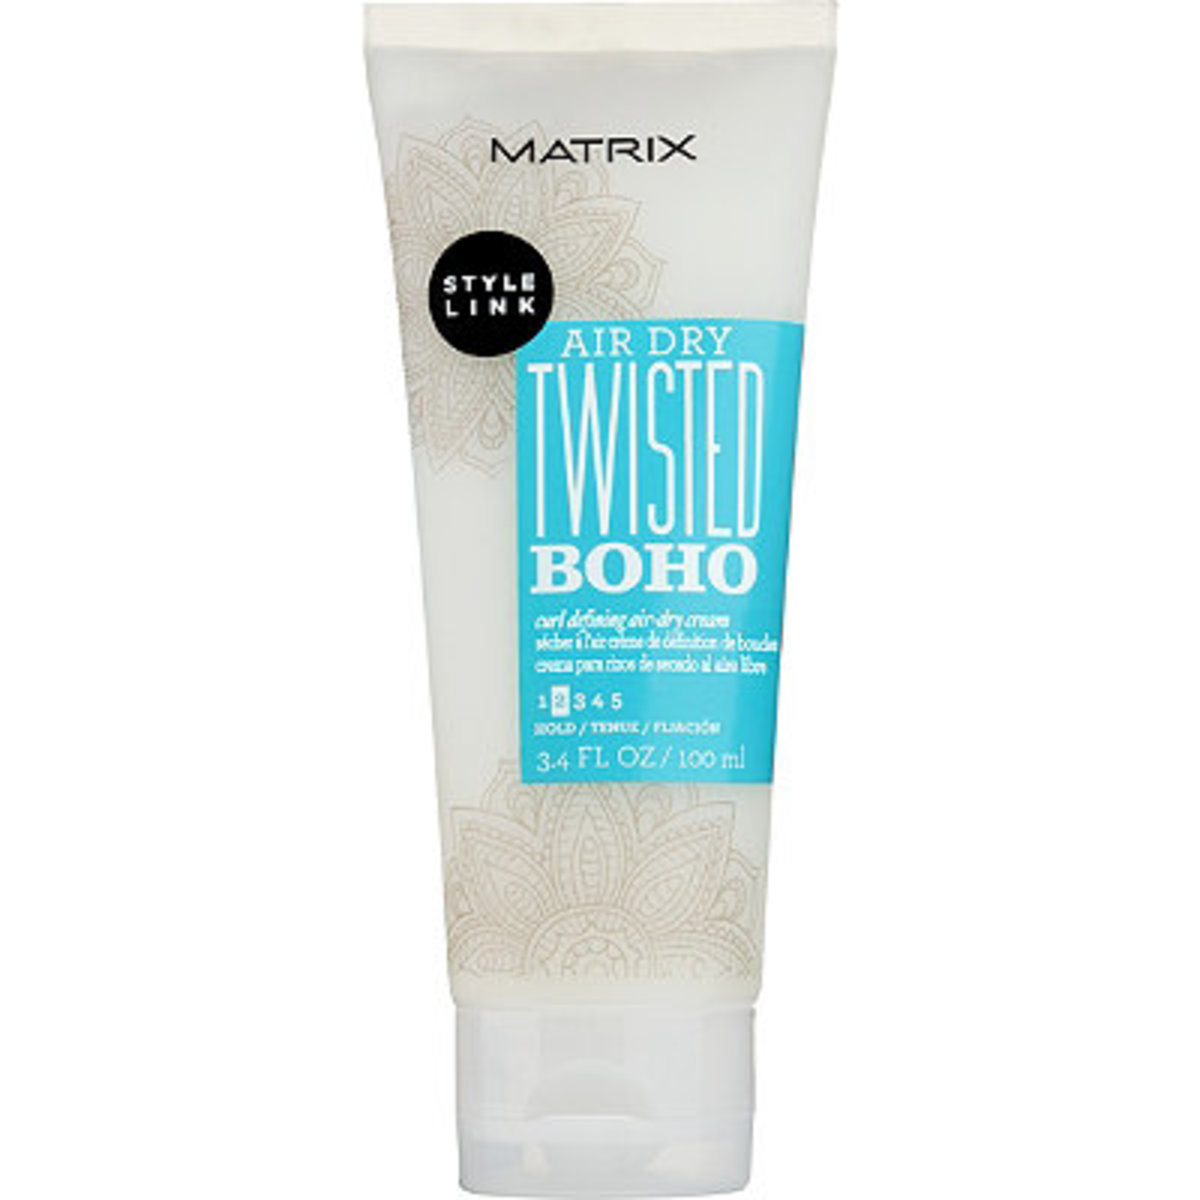 Matrix Style Link Twisted Boho Curl Defining Air-Dry Cream, $9.99, available at Ulta.